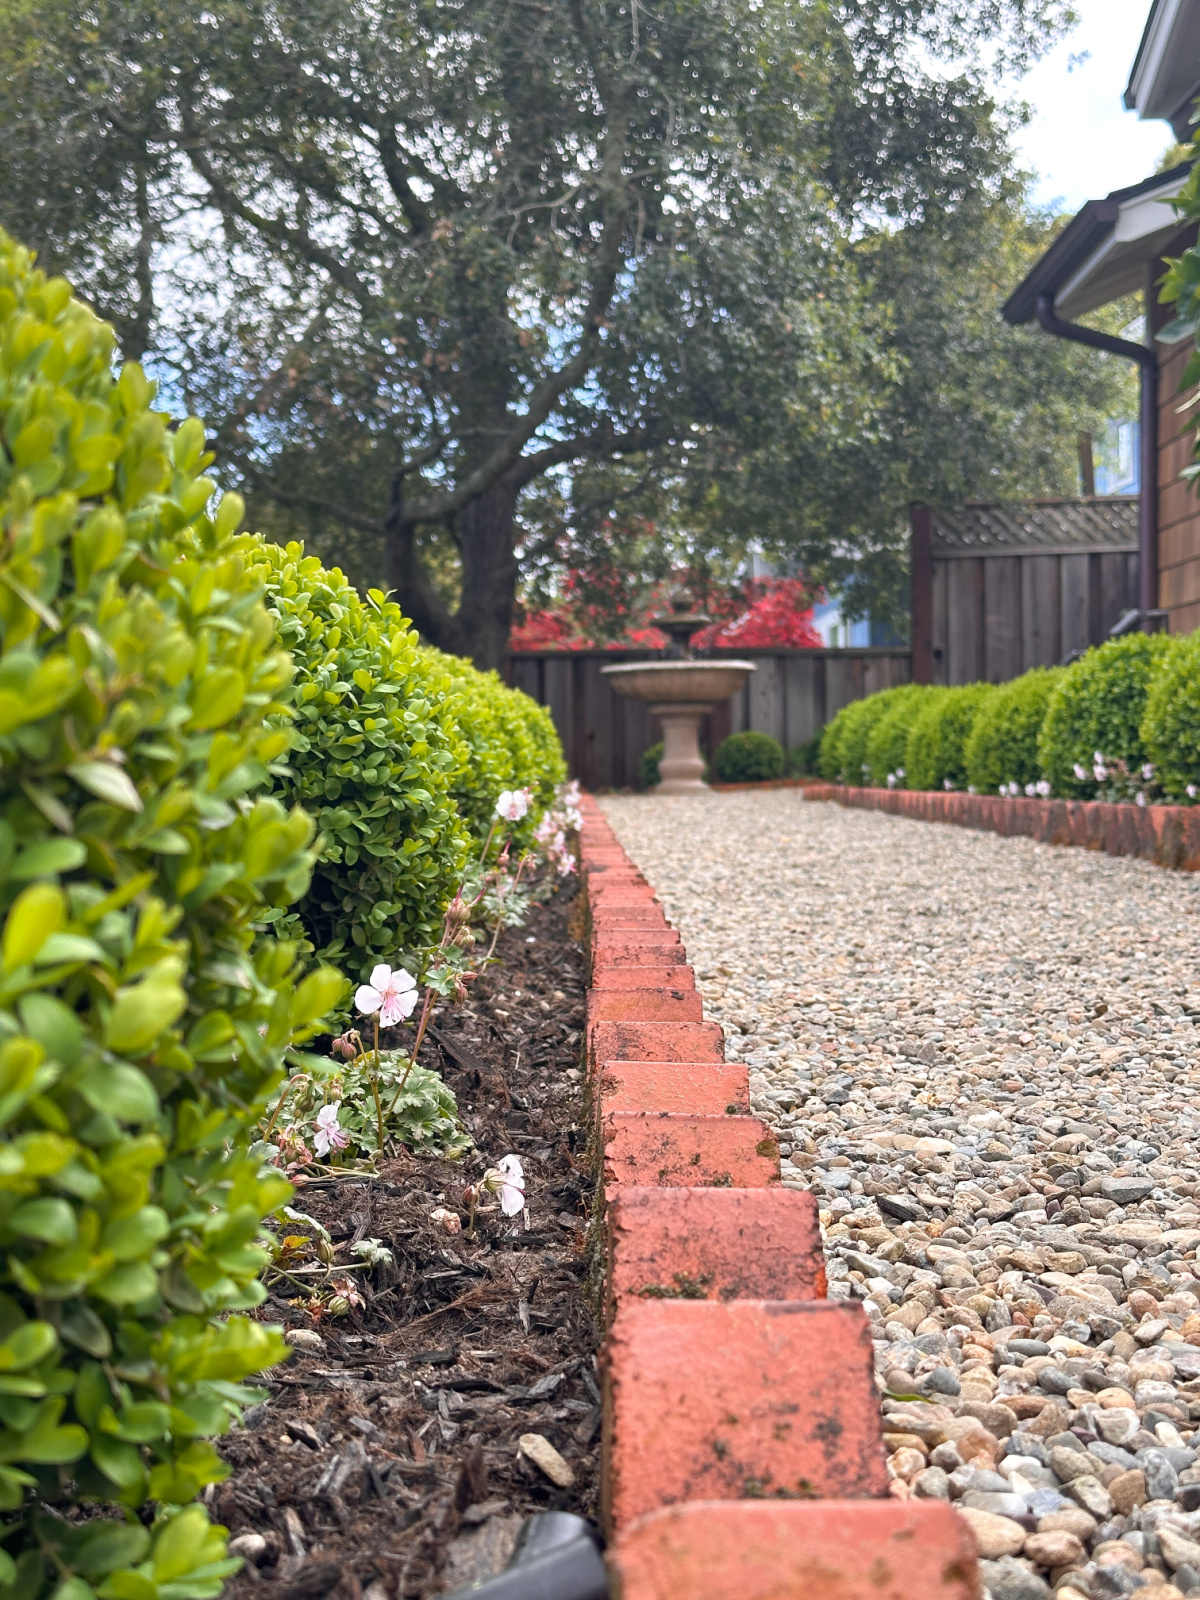 Brick lined gravel path and rows of boxwoods.